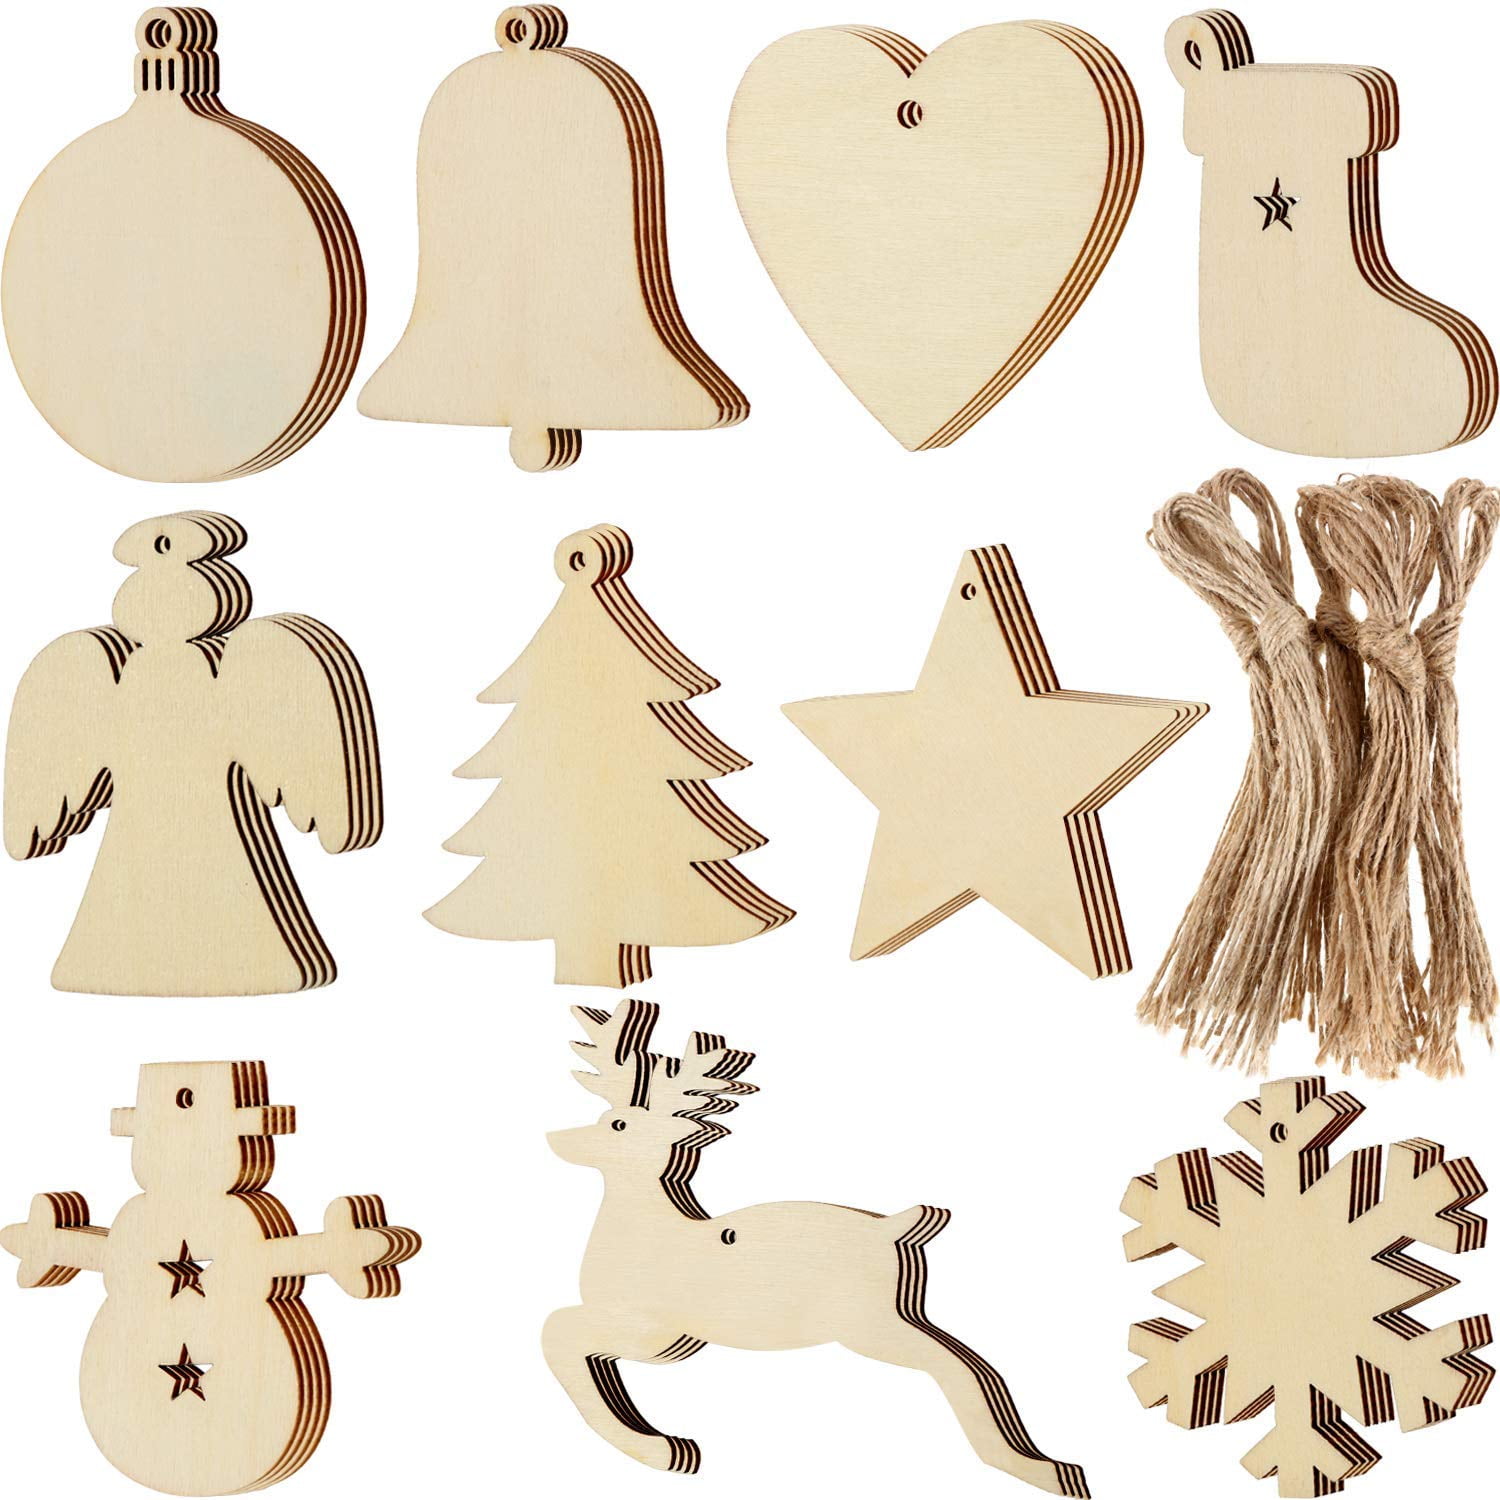 Unfinished Wooden Snowflakes Ornaments,27pcs Wooden Snowflake Christmas Ornaments Xmas Tree Decorations Hanging Embellishments Crafts Decor Tree Holiday Wedding Decorations